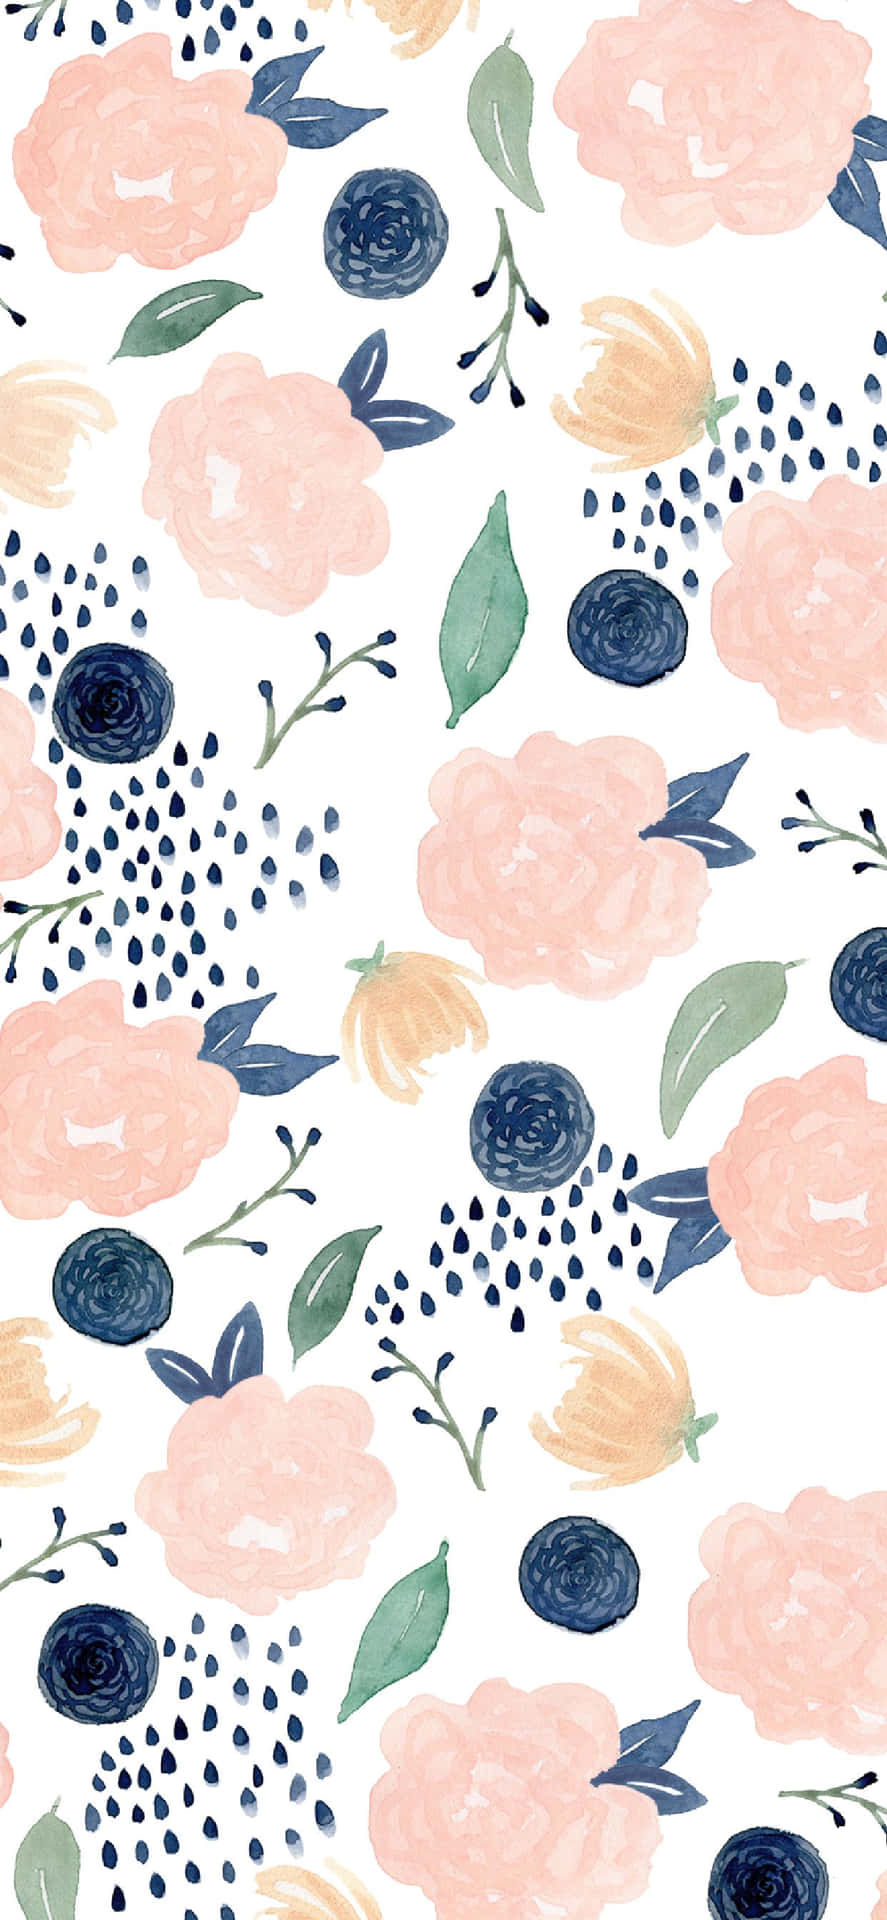 A Watercolor Floral Pattern With Blue Leaves And Pink Flowers